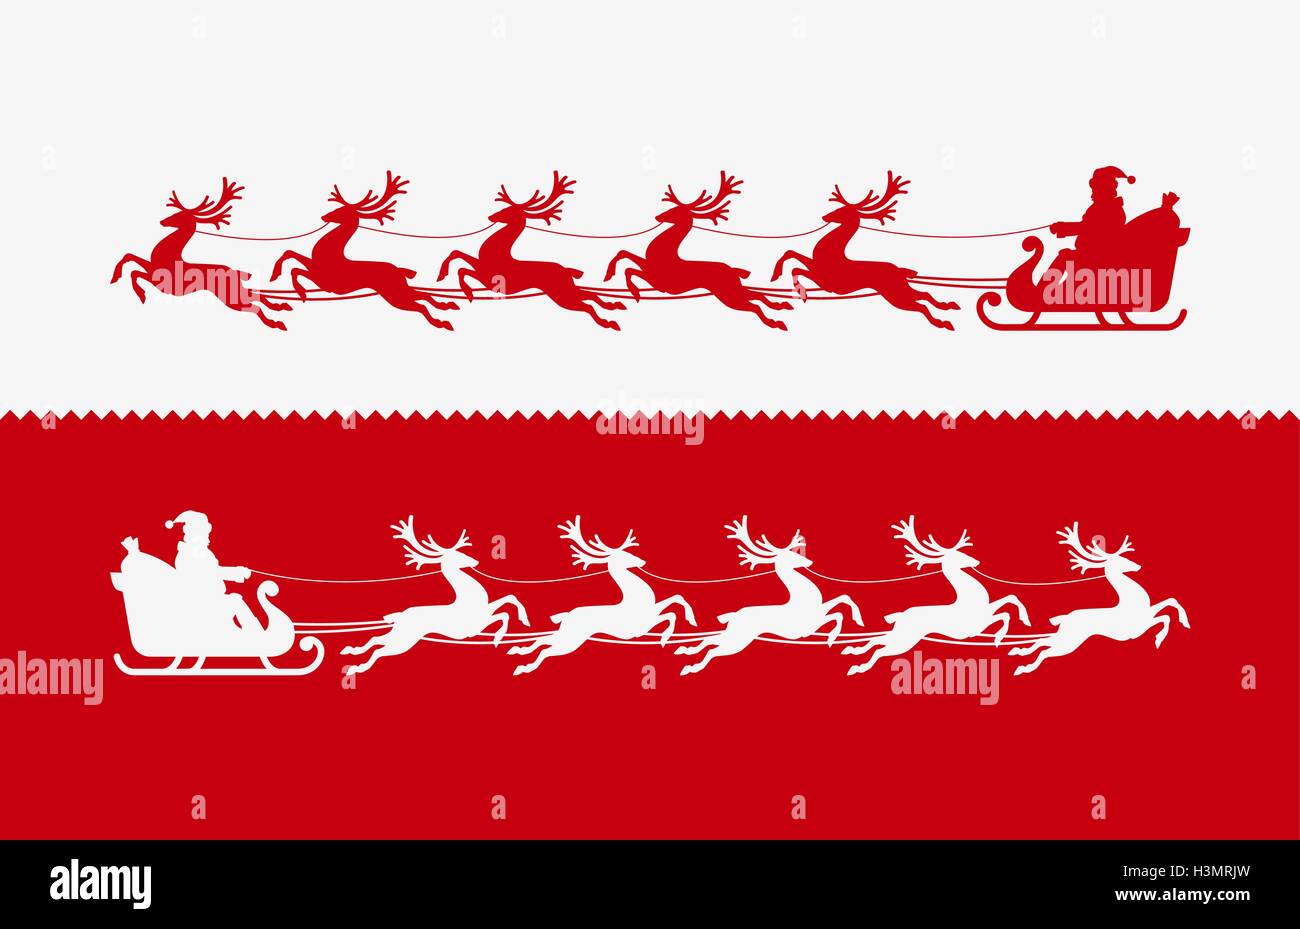 Santa Claus in sleigh pulled by reindeer. Christmas illustration vector Stock Vector